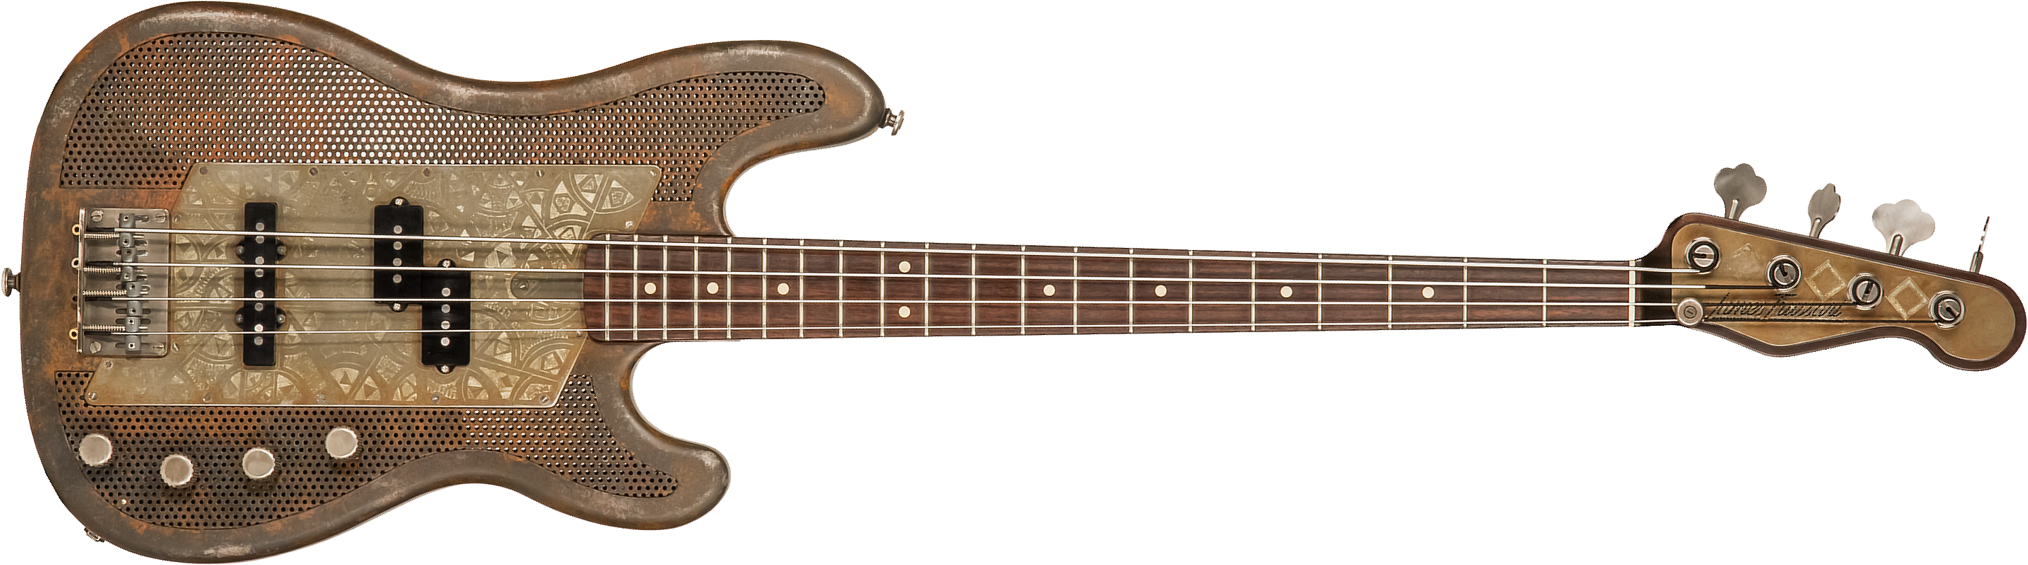 James Trussart Steelcaster Bass Perforated Active Pf #19045 - Rust O Matic African Engraved - Bajo eléctrico de cuerpo sólido - Main picture